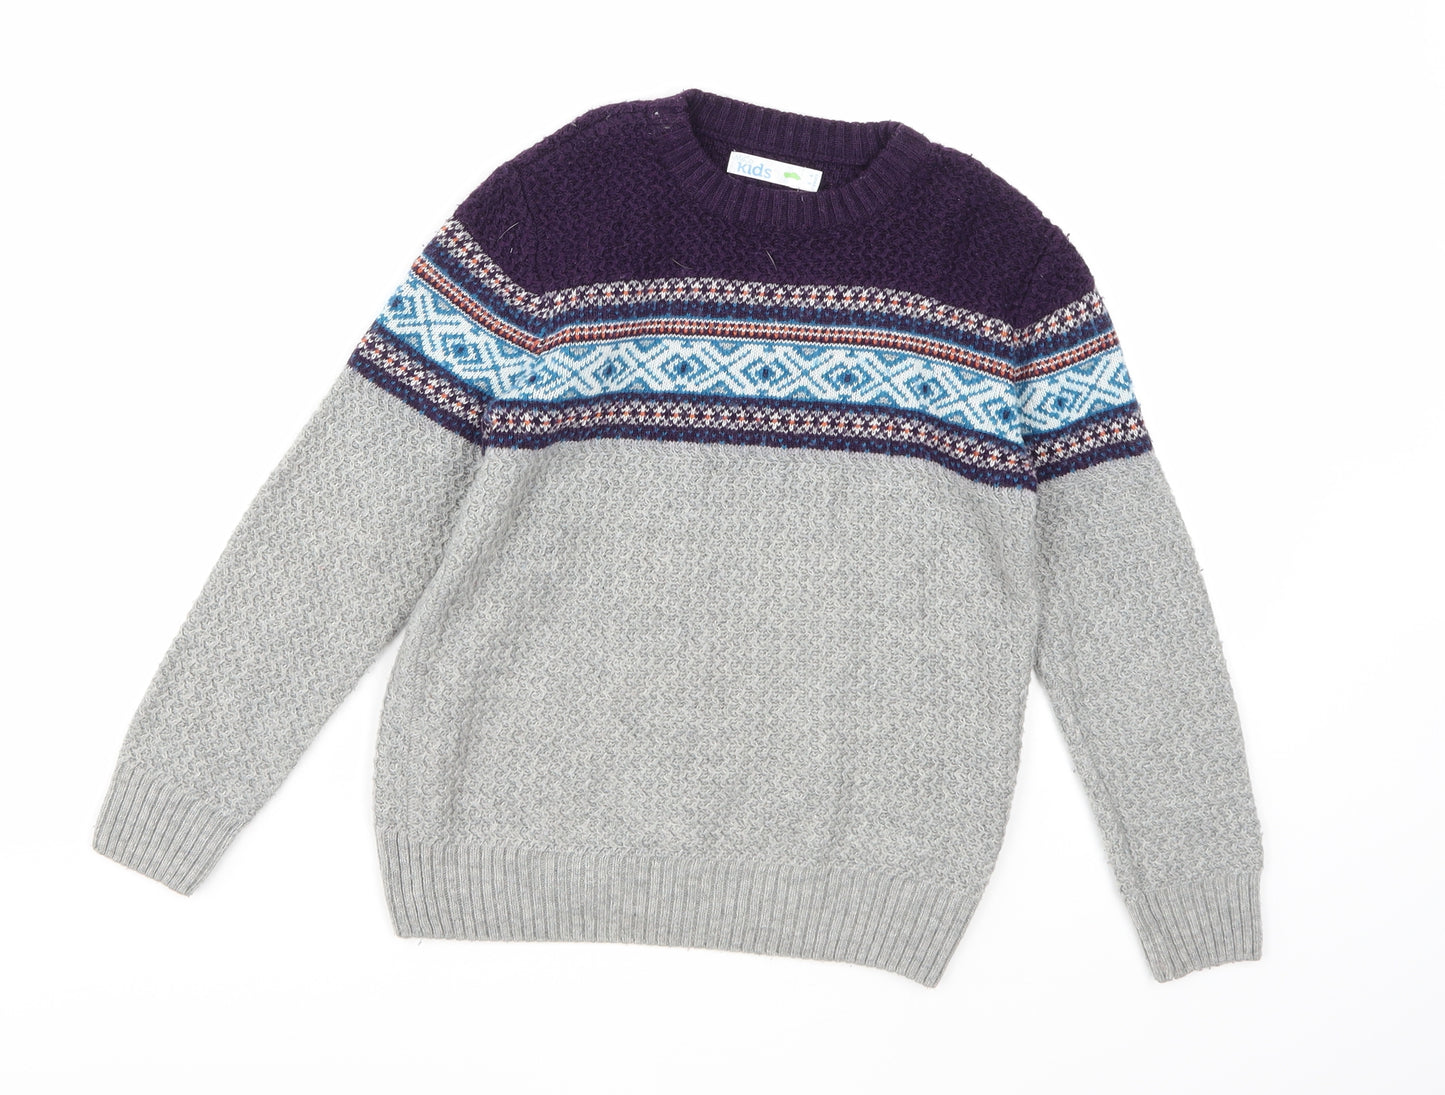 M&Co Boys Grey  Knit Pullover Jumper Size 5-6 Years